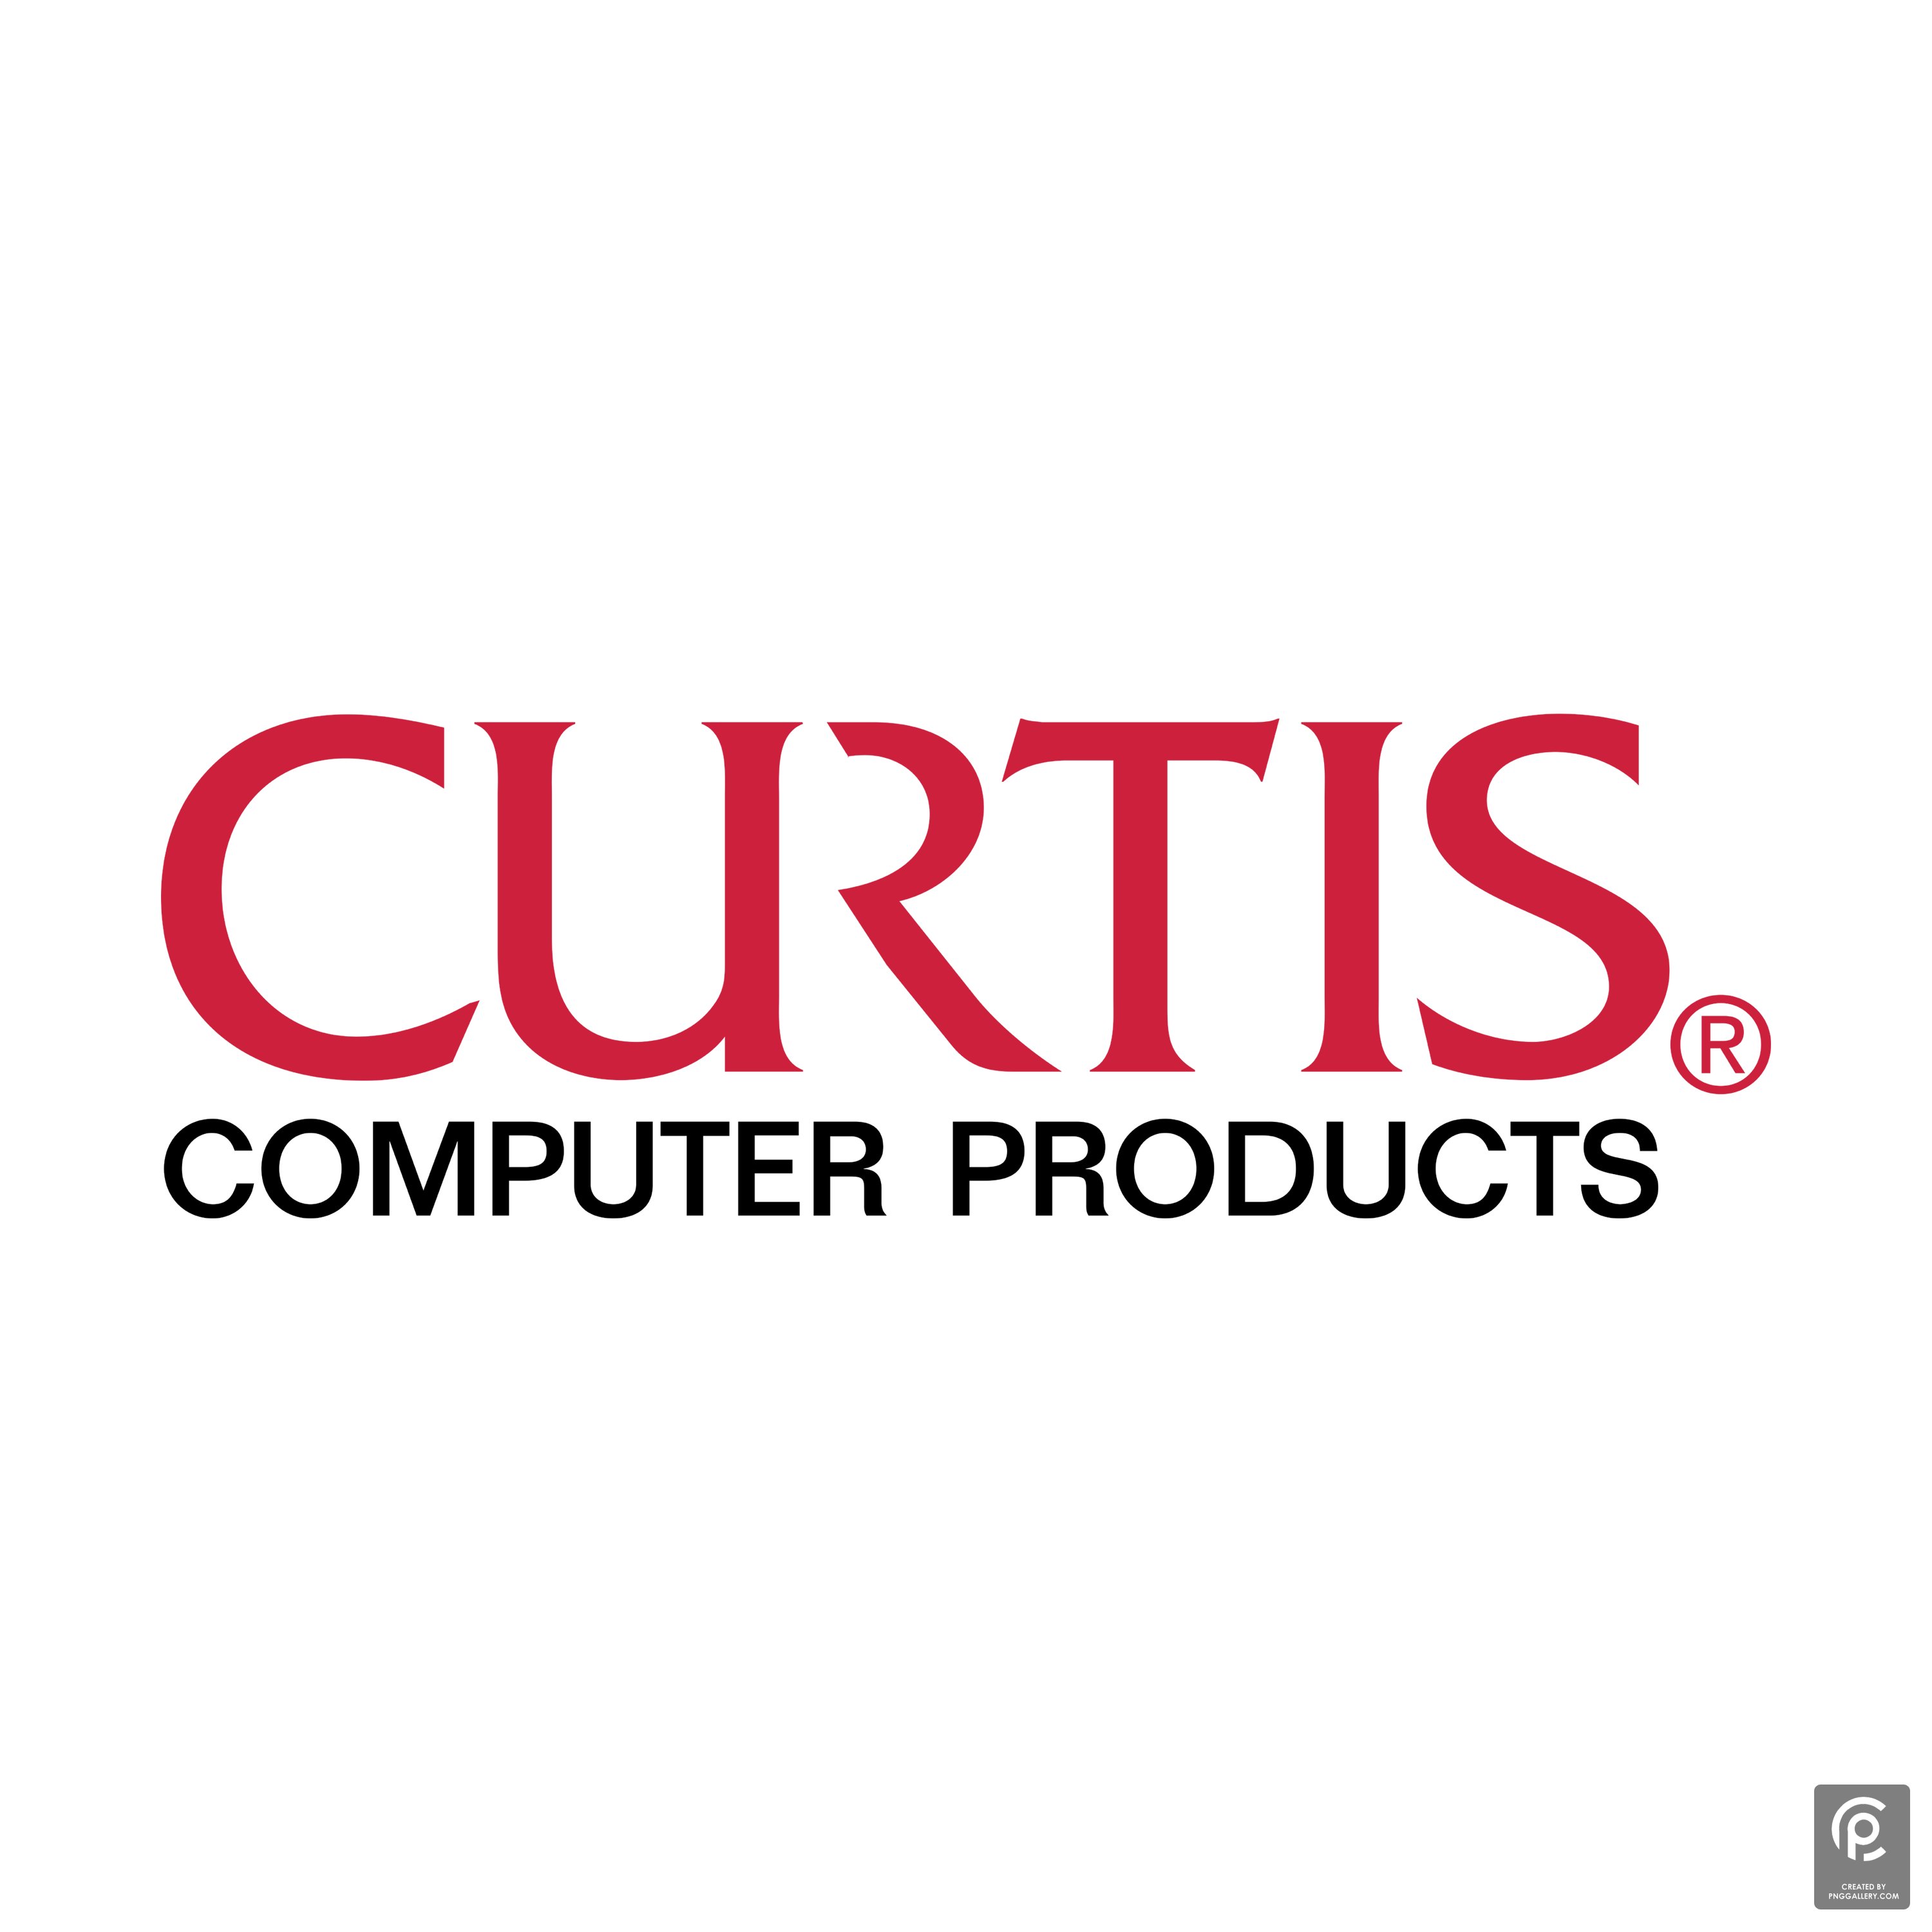 Curtis Computer Products Logo Transparent Clipart